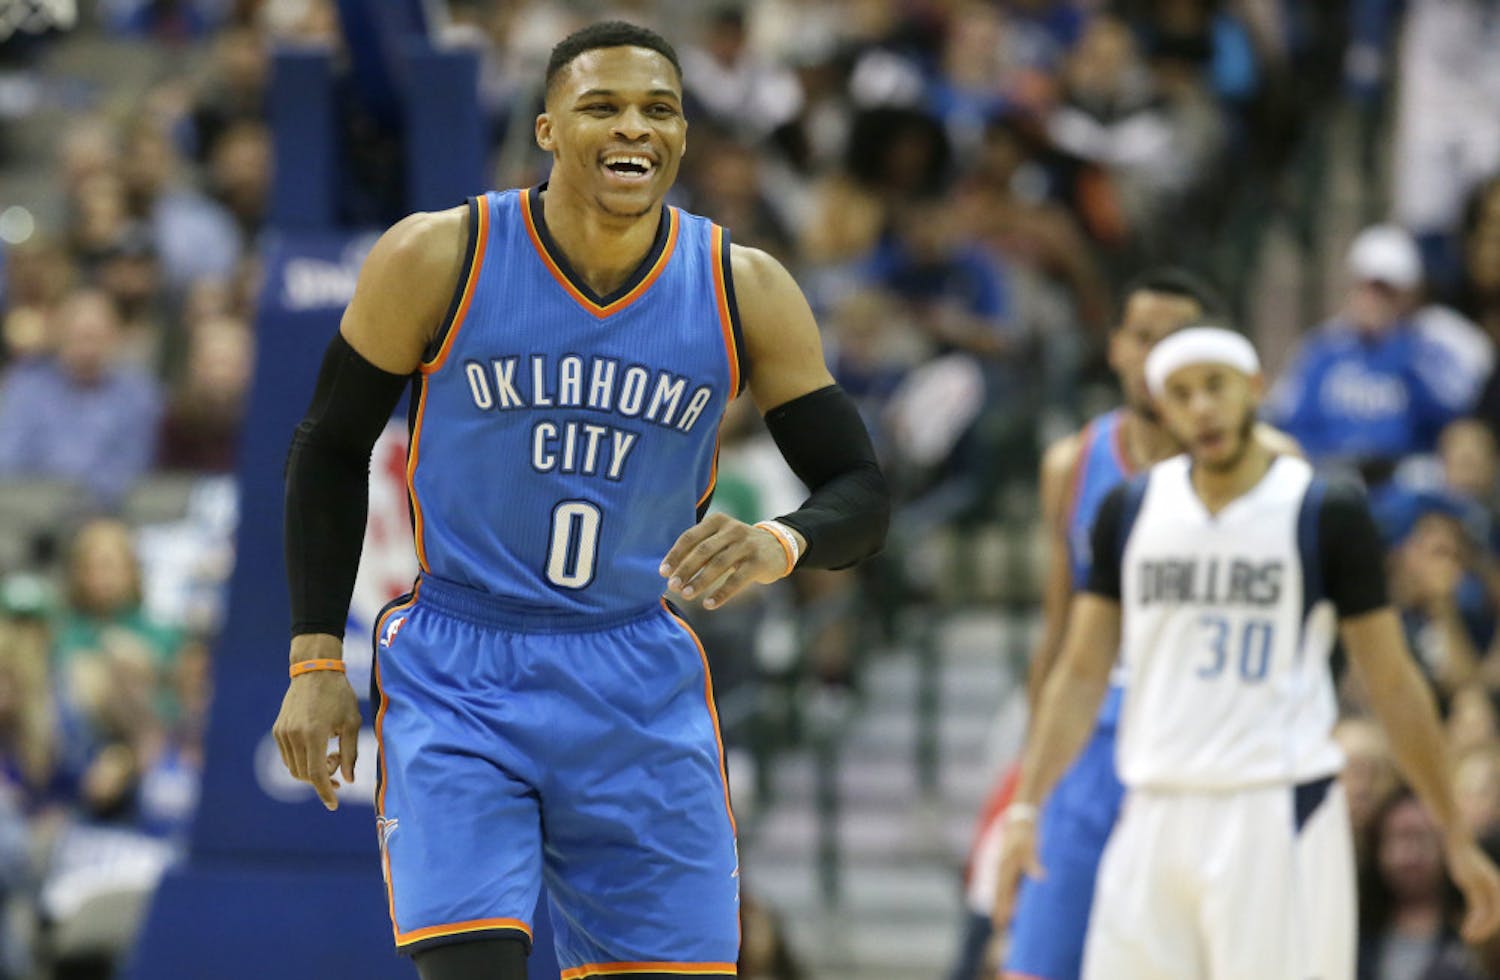 FILE - In this March 5, 2017, file photo, Oklahoma City Thunder guard Russell Westbrook (0) smiles on the court during the second half of an NBA basketball game against the Dallas Mavericks, in Dallas. Westbrook was once considered selfish and out of control. Now, he's harnessed his fury and competitive fire to become the ultimate teammate. (AP Photo/LM Otero, File)